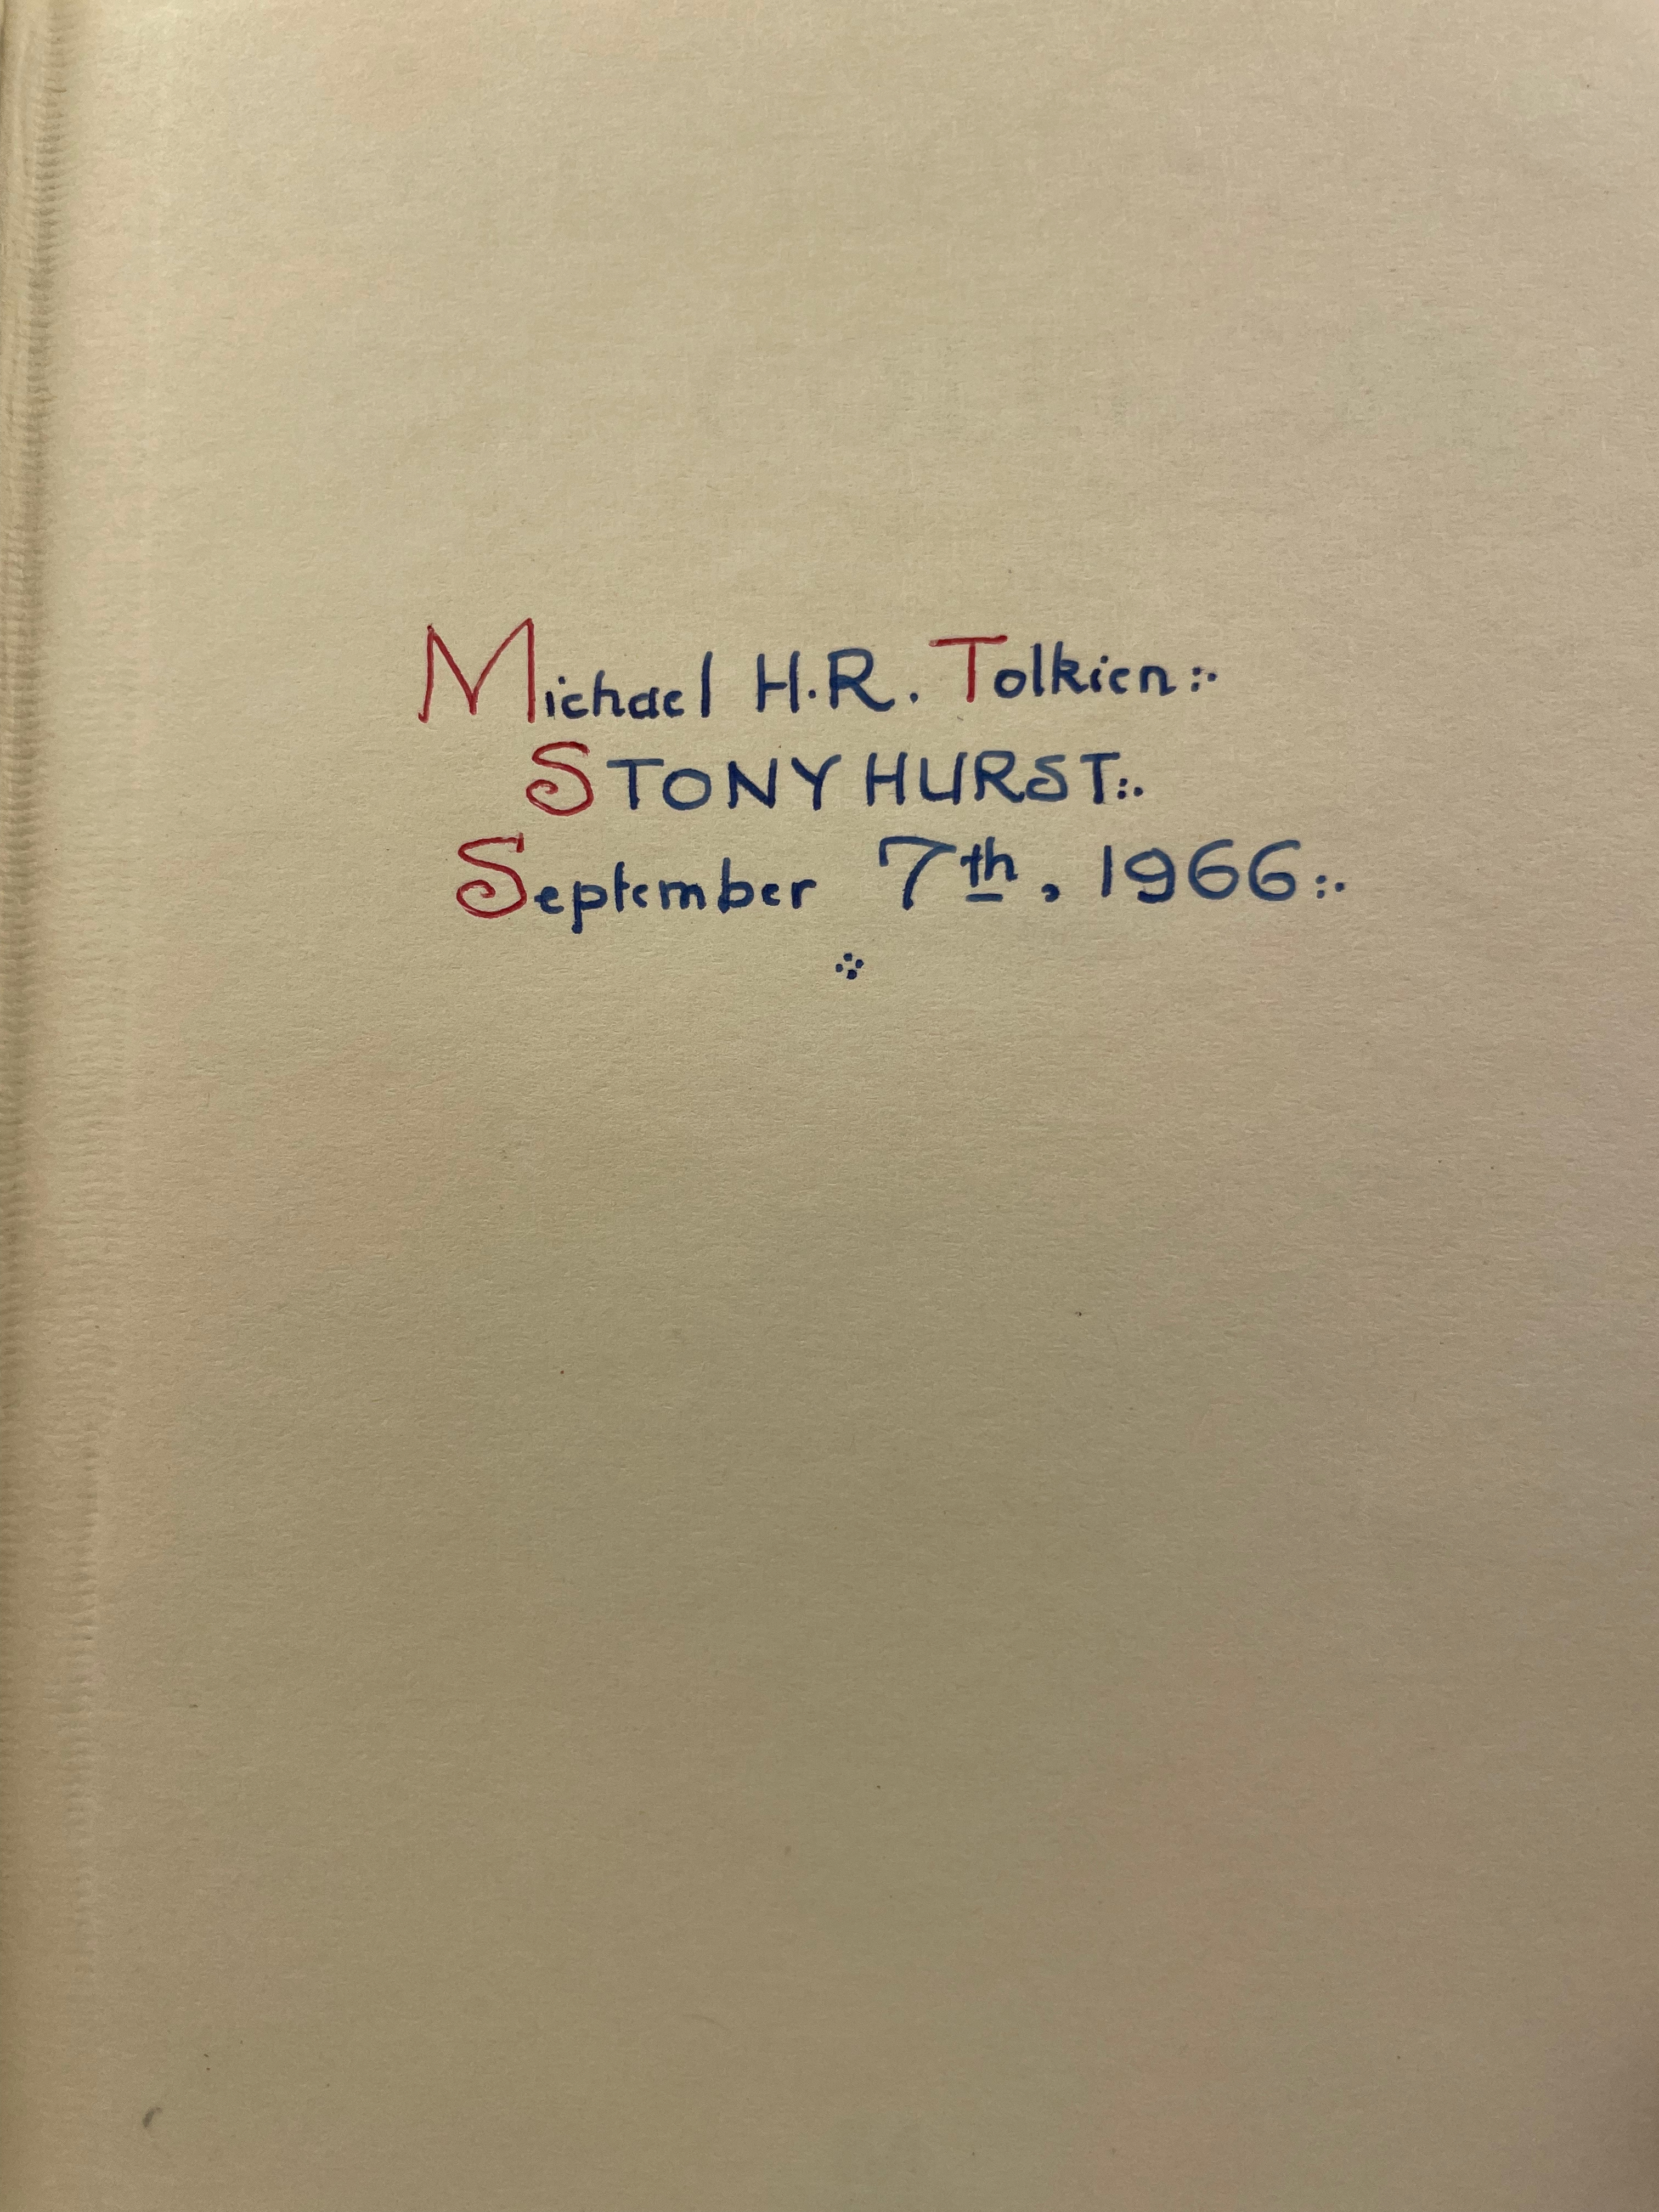 Reflections on the Collects from the library of Michael H. R. Tolkien Second Impression 1966 5